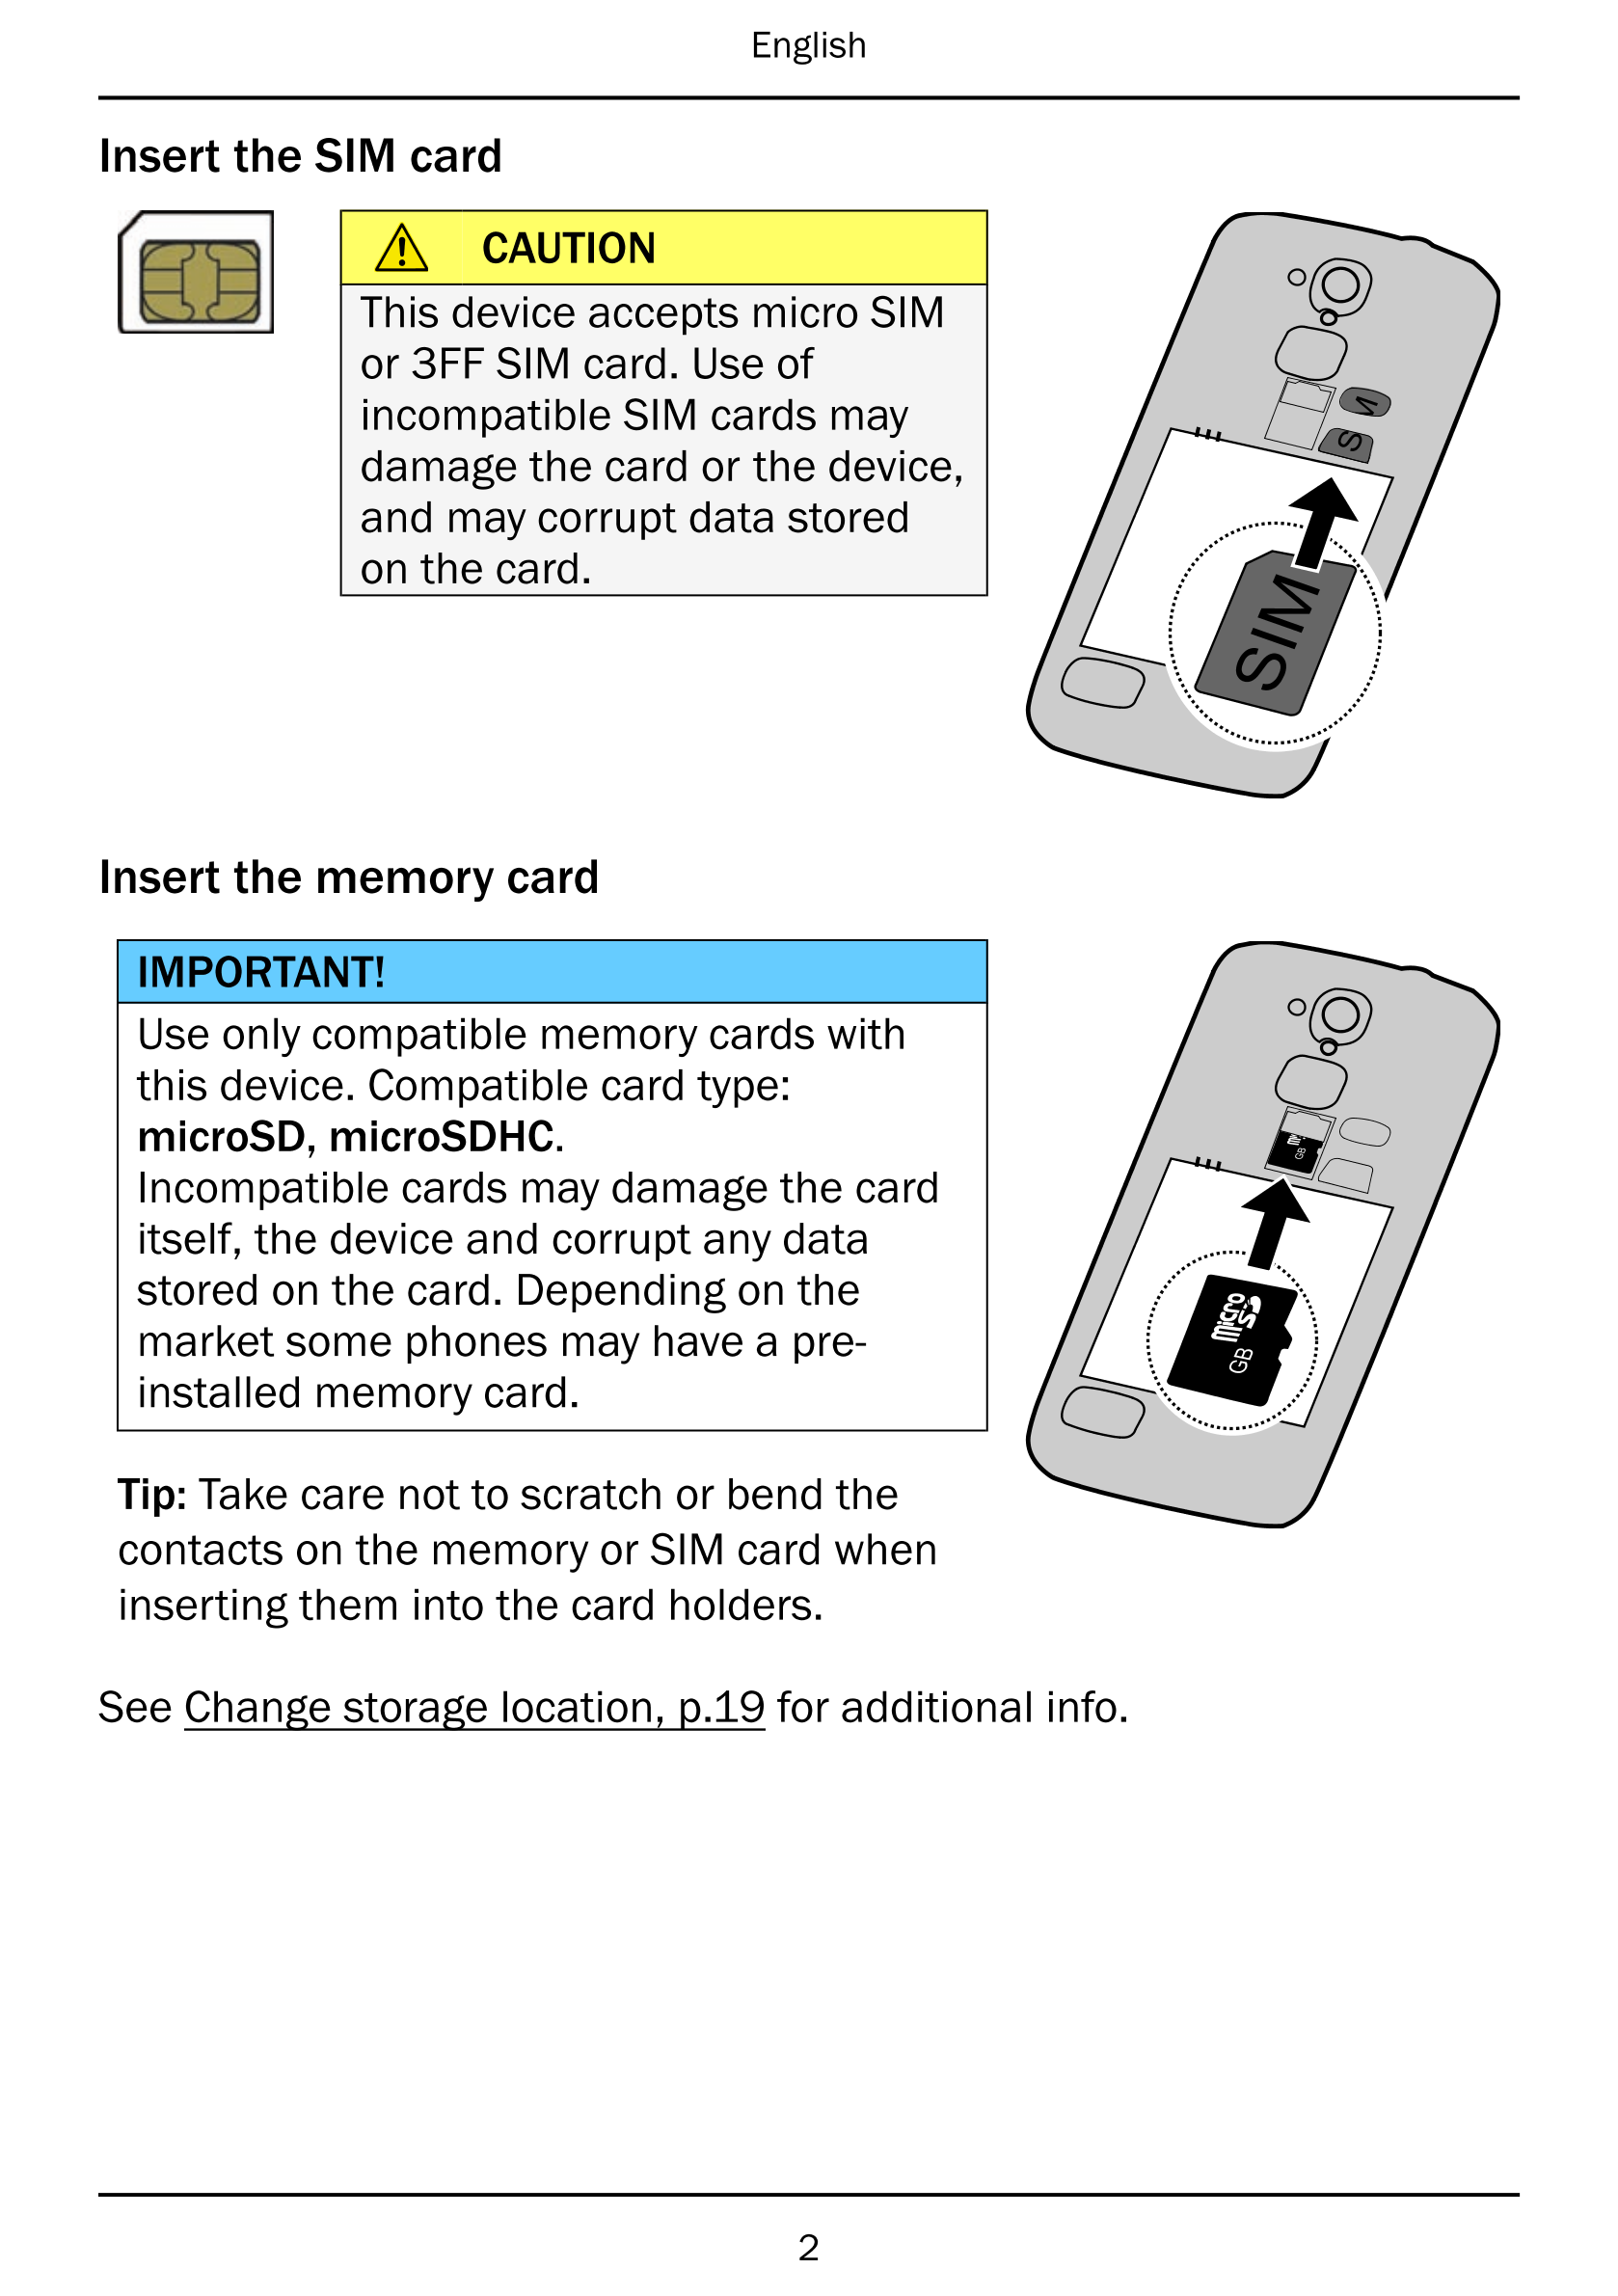 English
Insert the SIM card
CAUTION
This device accepts micro SIM
or 3FF SIM card. Use of
incompatible SIM cards may
damage the 